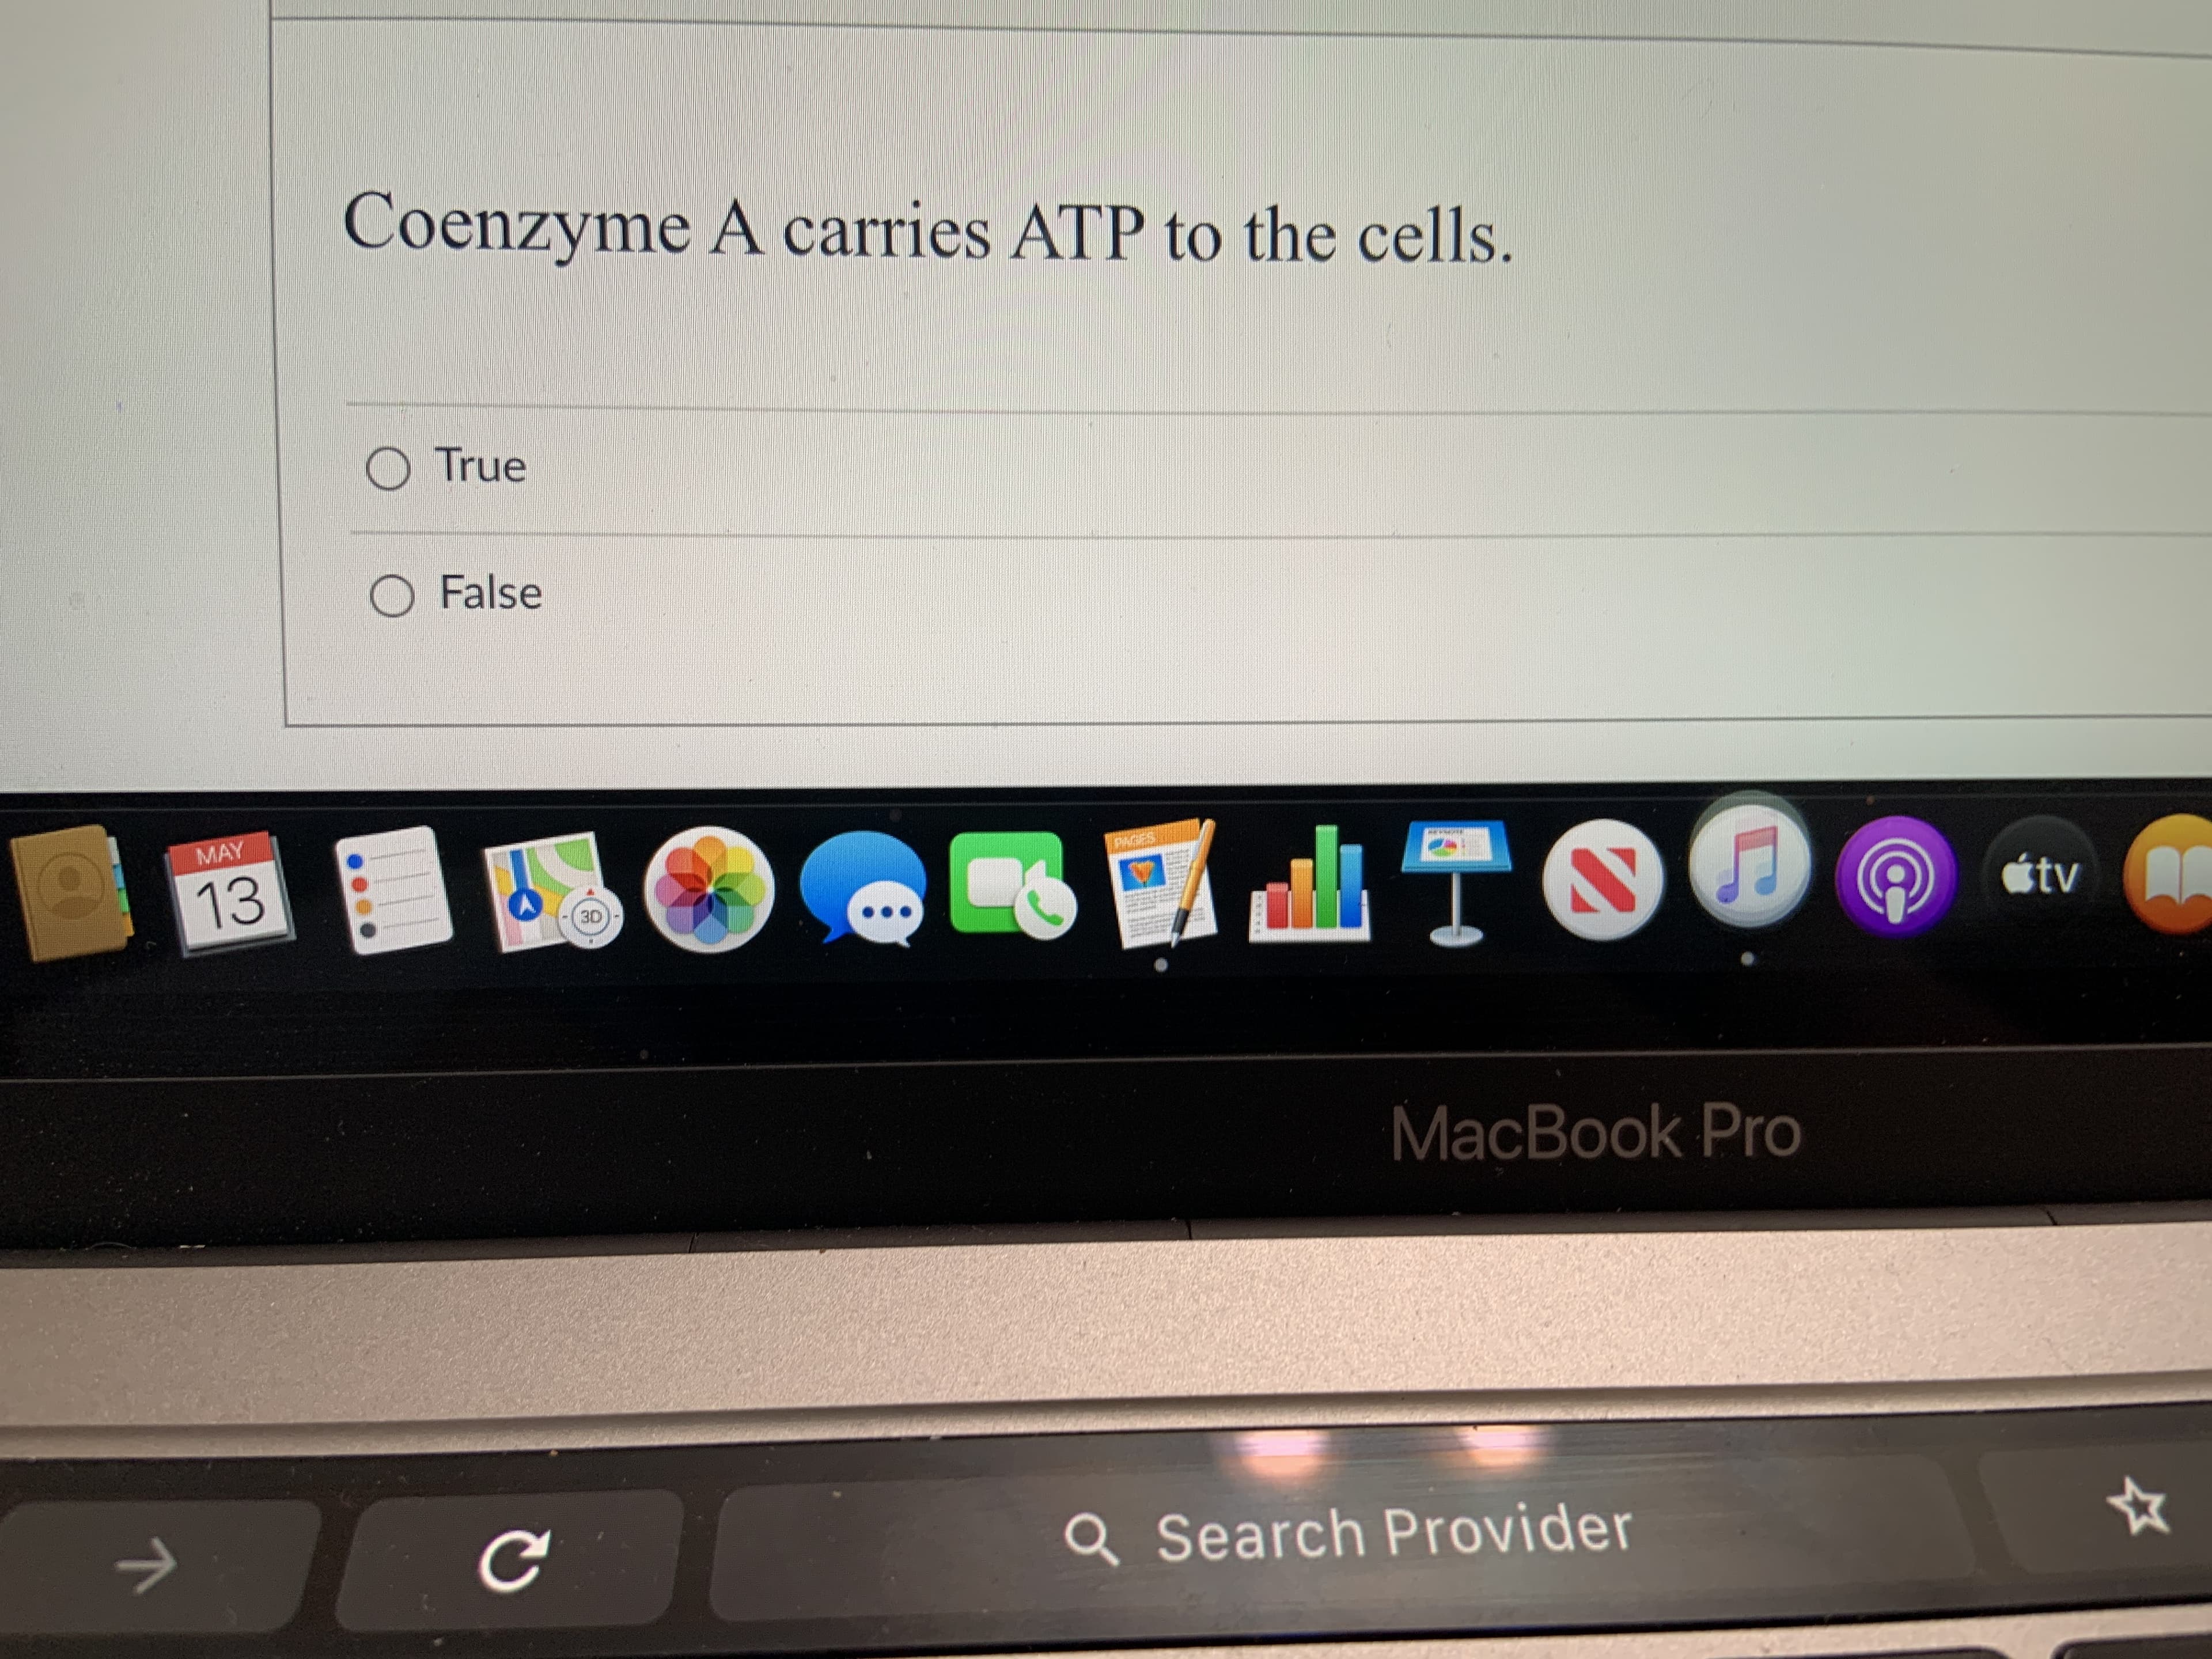 Coenzyme A carries ATP to the cells.
